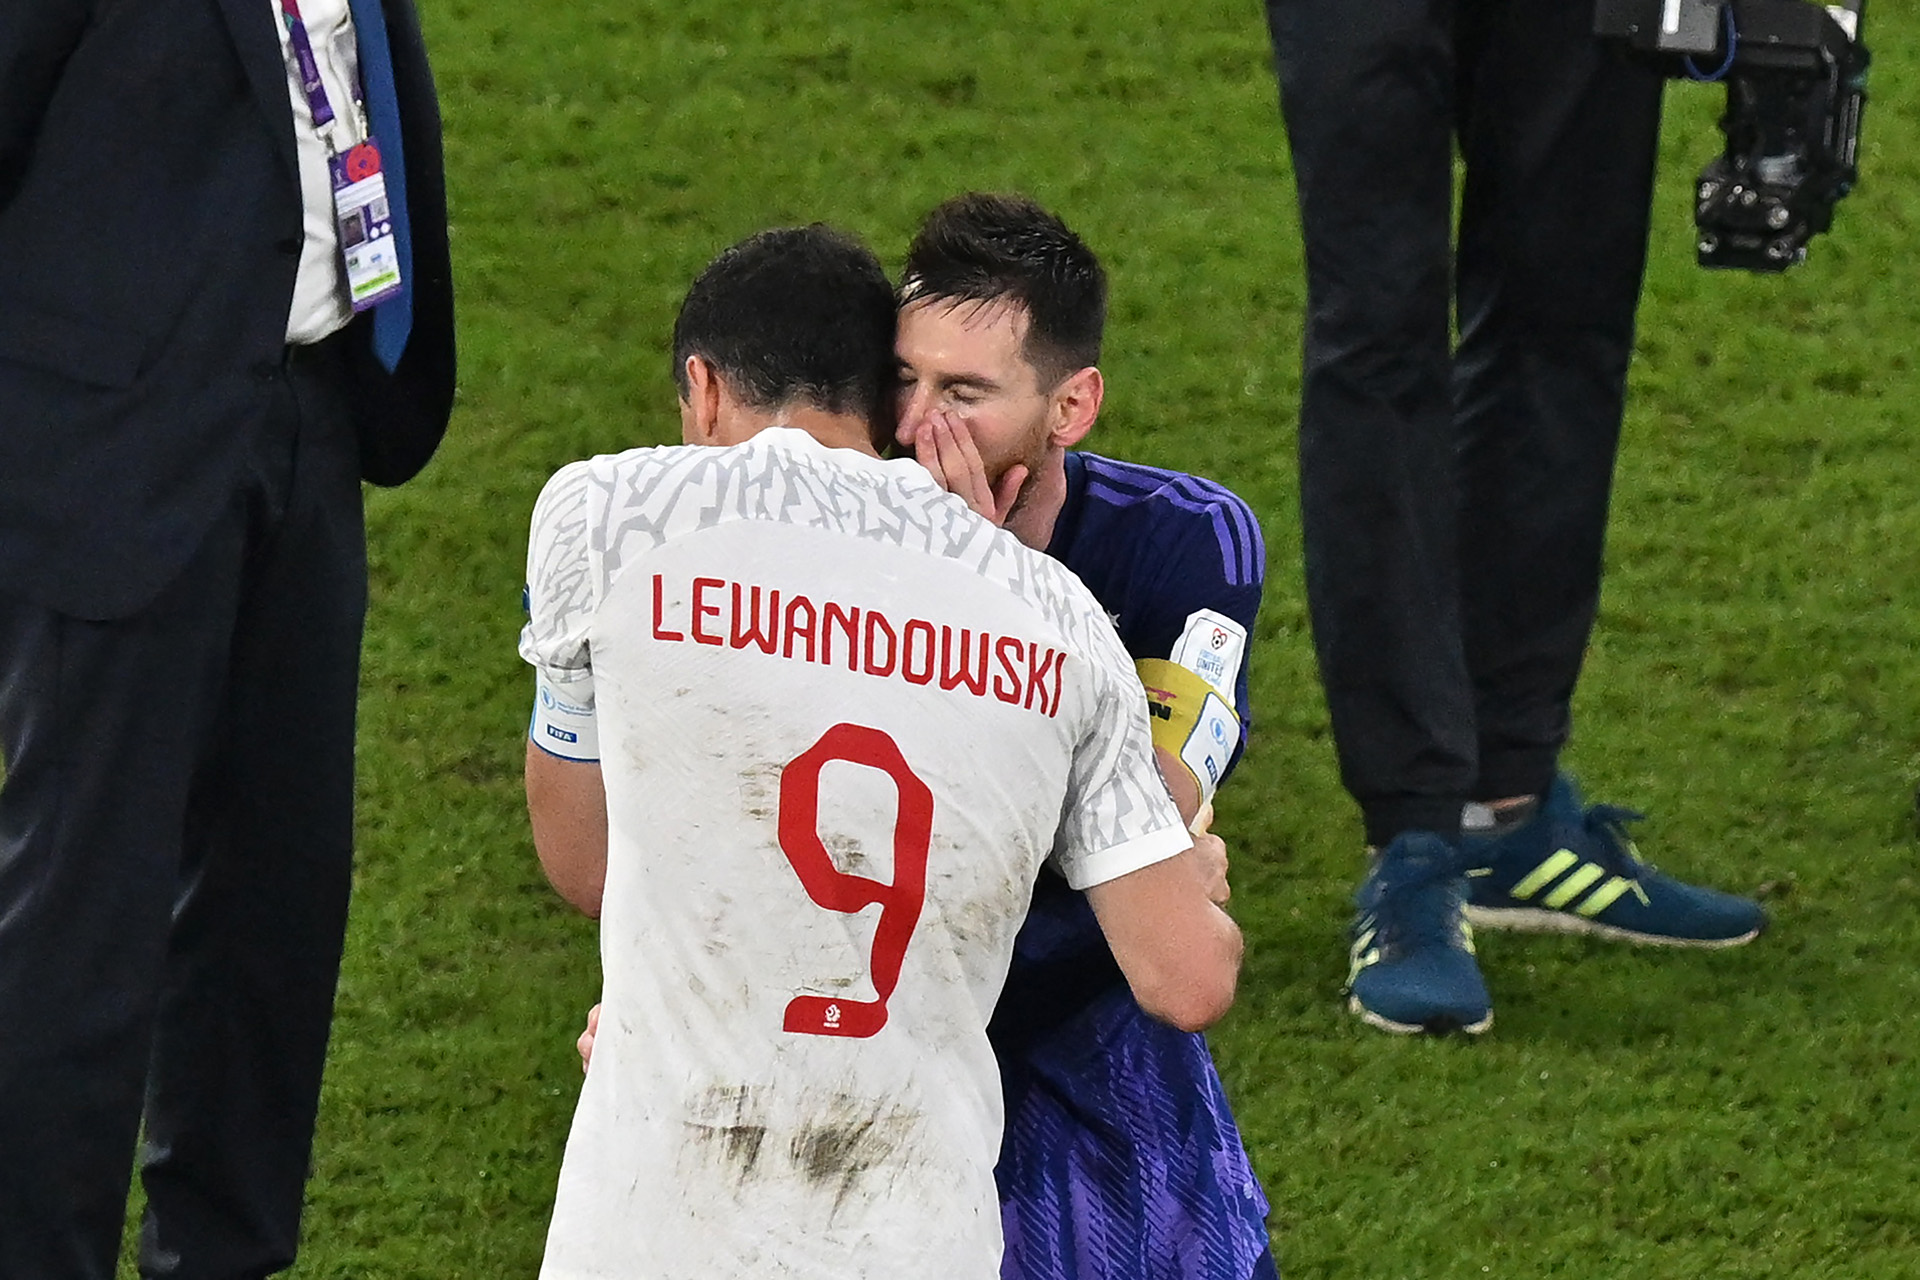 Poland's forward #09 Robert Lewandowski (L) and Argentina's forward #10 Lionel Messi greet each other at the end of the Qatar 2022 World Cup Group C football match between Poland and Argentina at Stadium 974 in Doha on November 30, 2022. (Photo by Glyn KIRK / AFP)